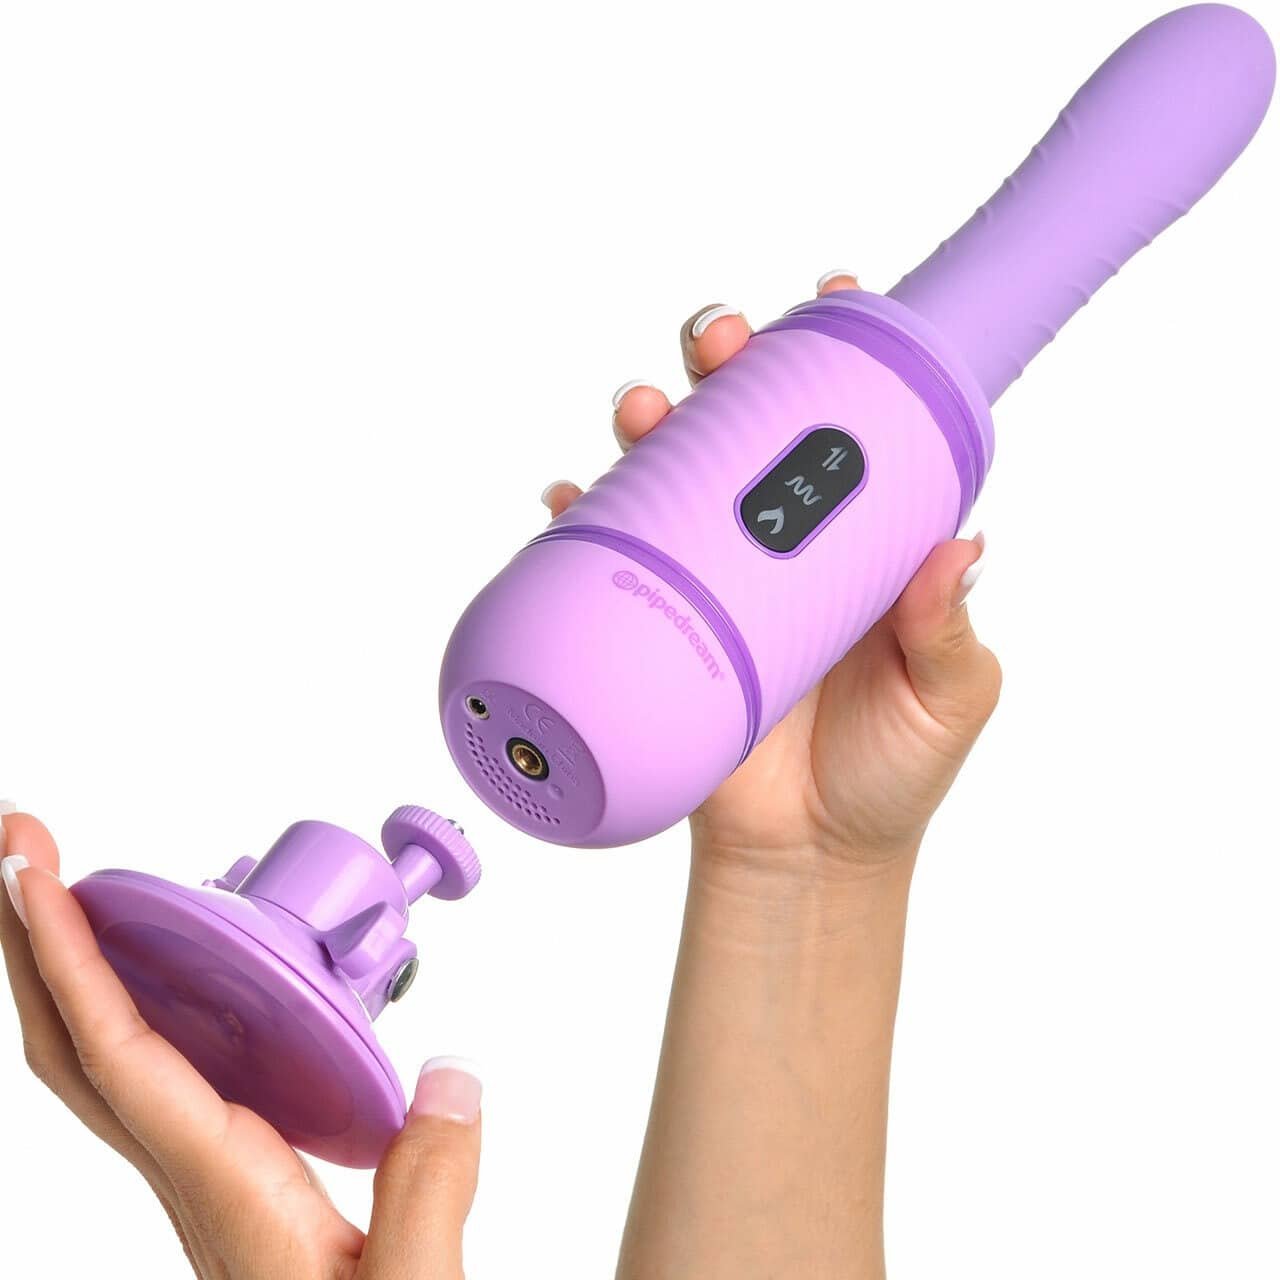  Fantasy For Her Rechargeable Remote Control Sex Machine . Slide 5